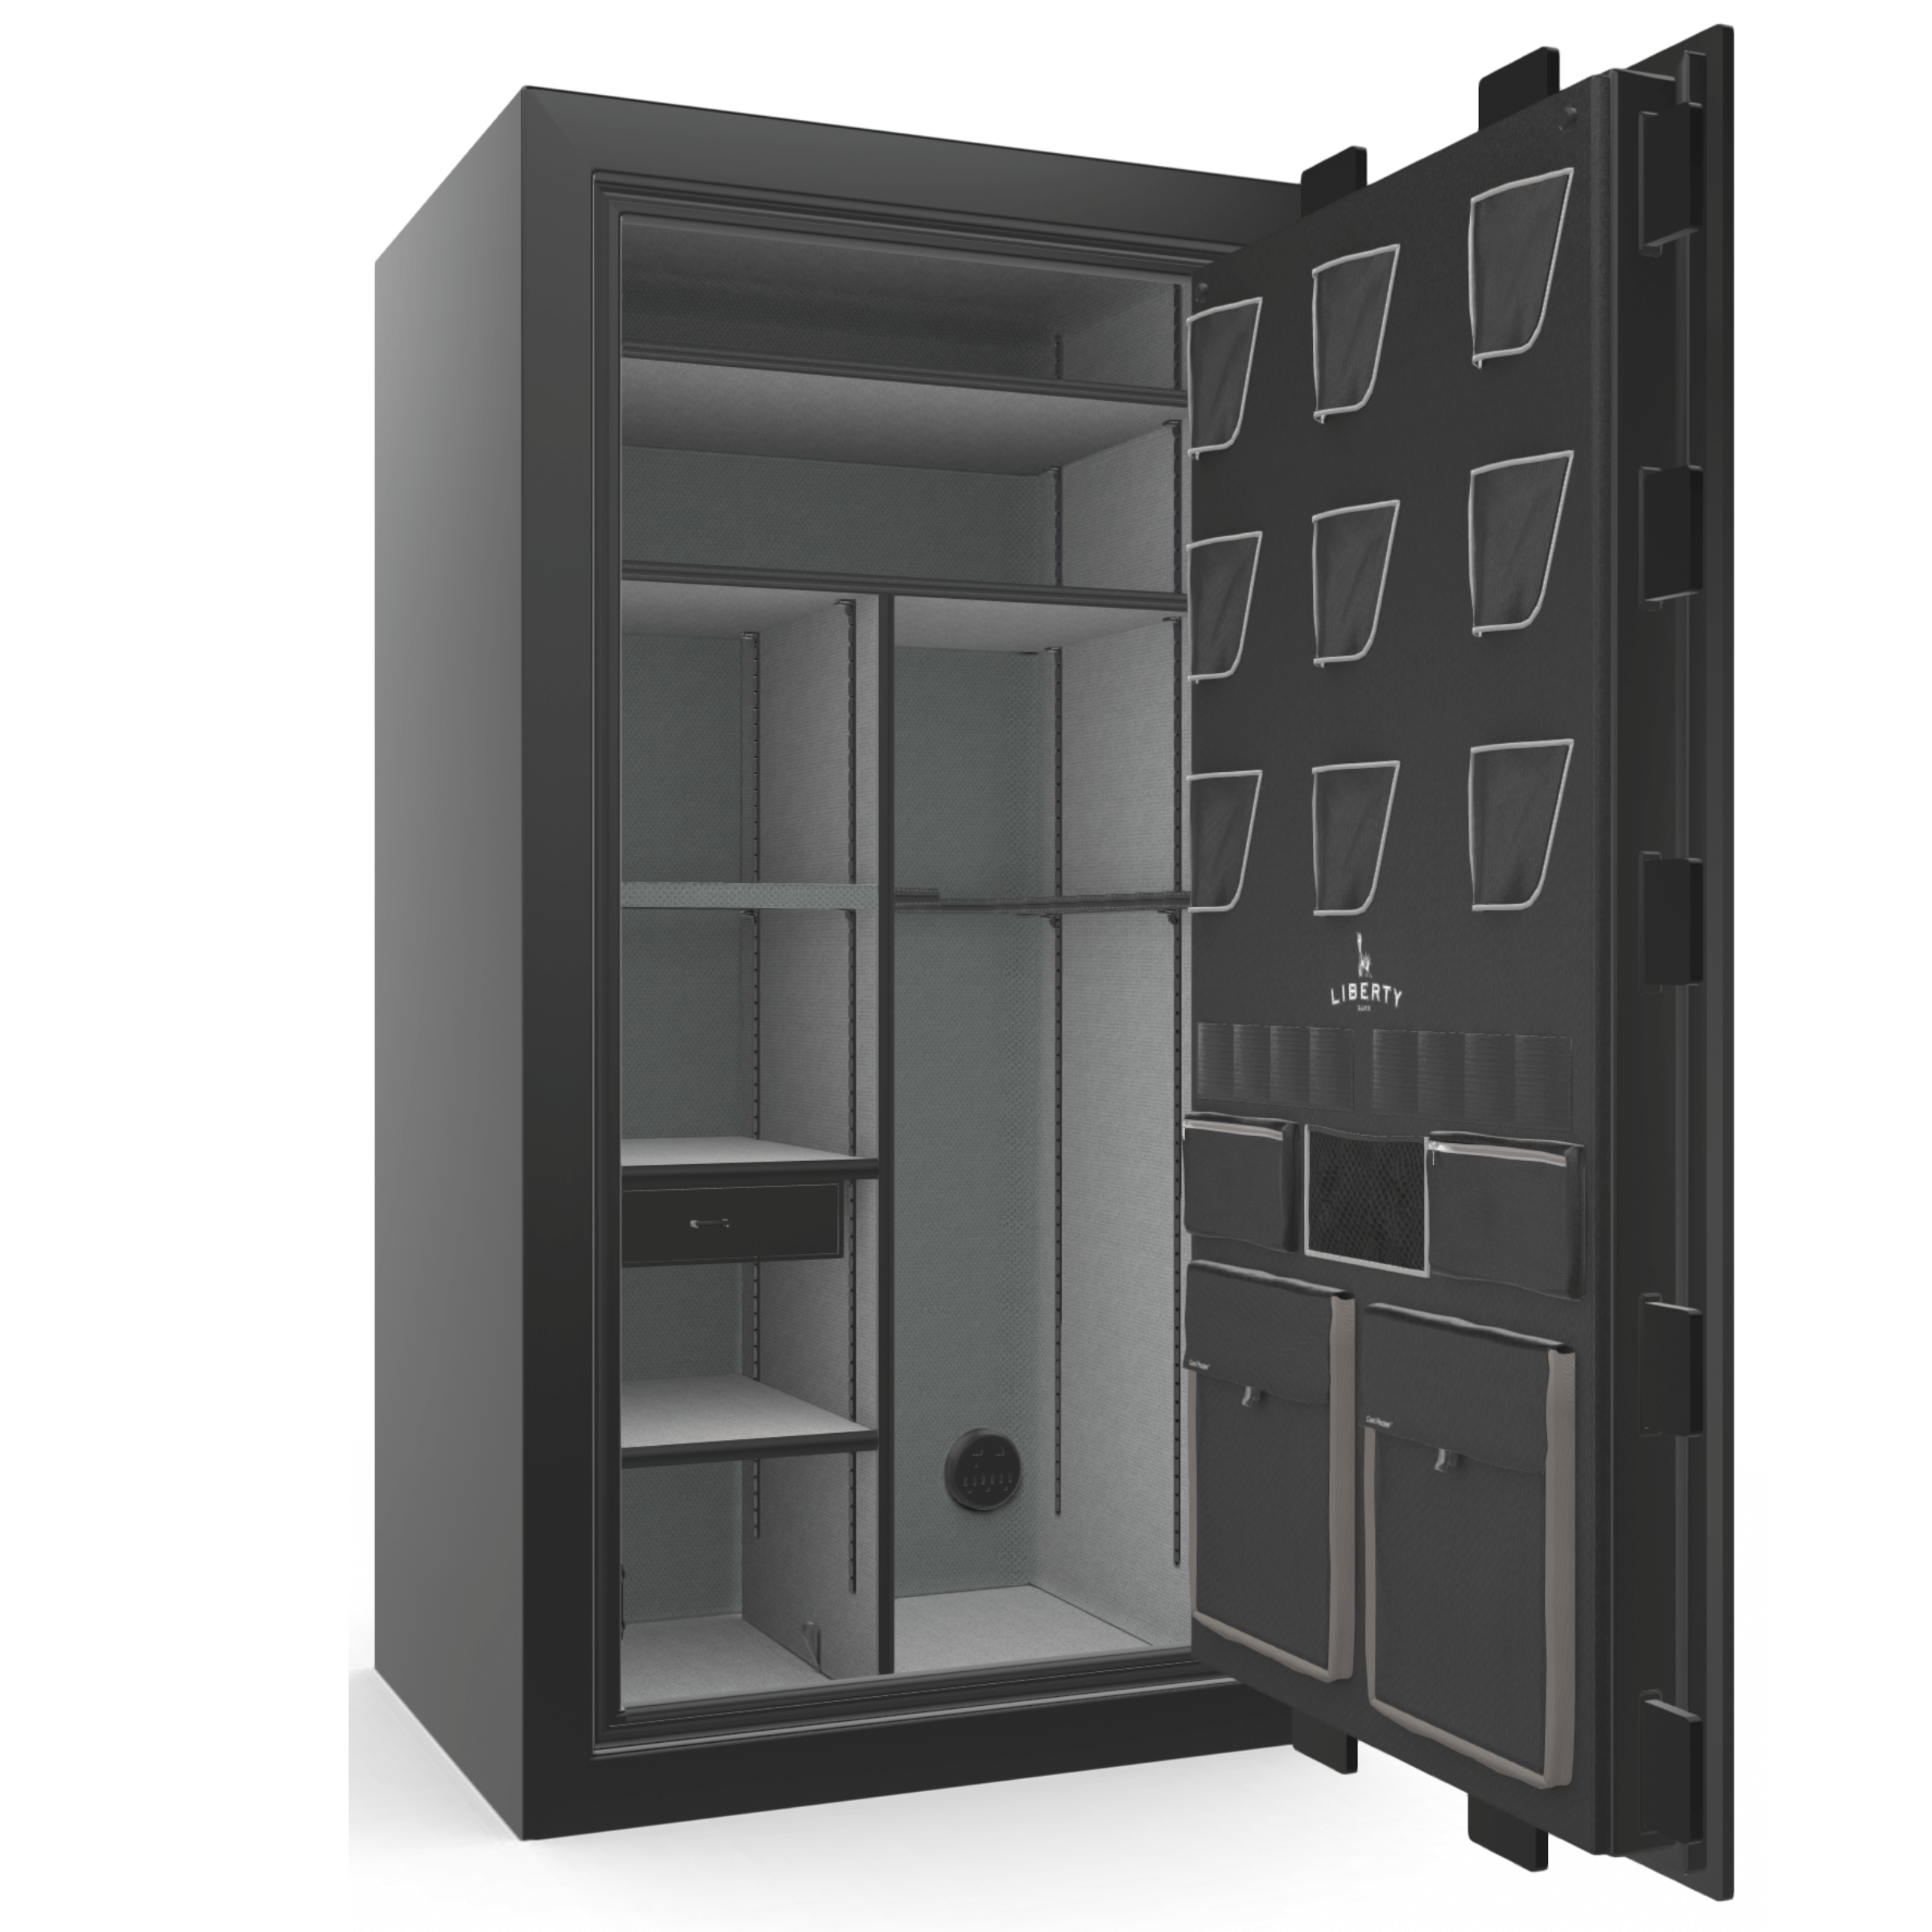 Classic Plus Series | Level 7 Security | 110 Minute Fire Protection | 50 | DIMENSIONS: 72.5"(H) X 42"(W) X 32"(D) | Gray 2 Tone | Electronic Lock